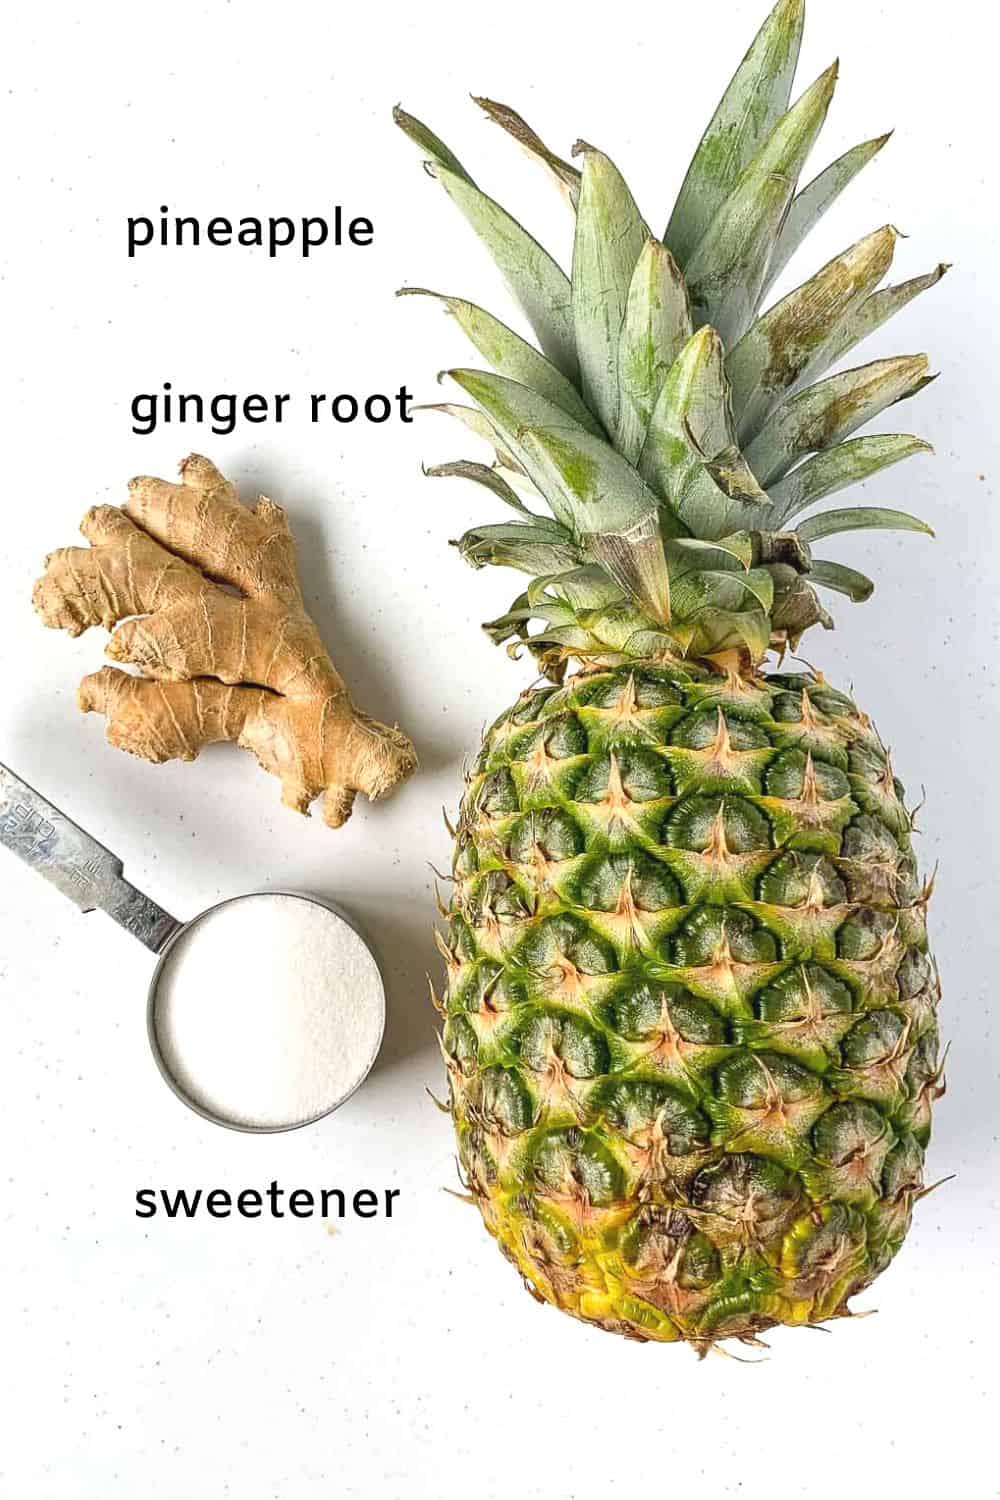 Ingredients for Pineapple Ginger Agua Fresca